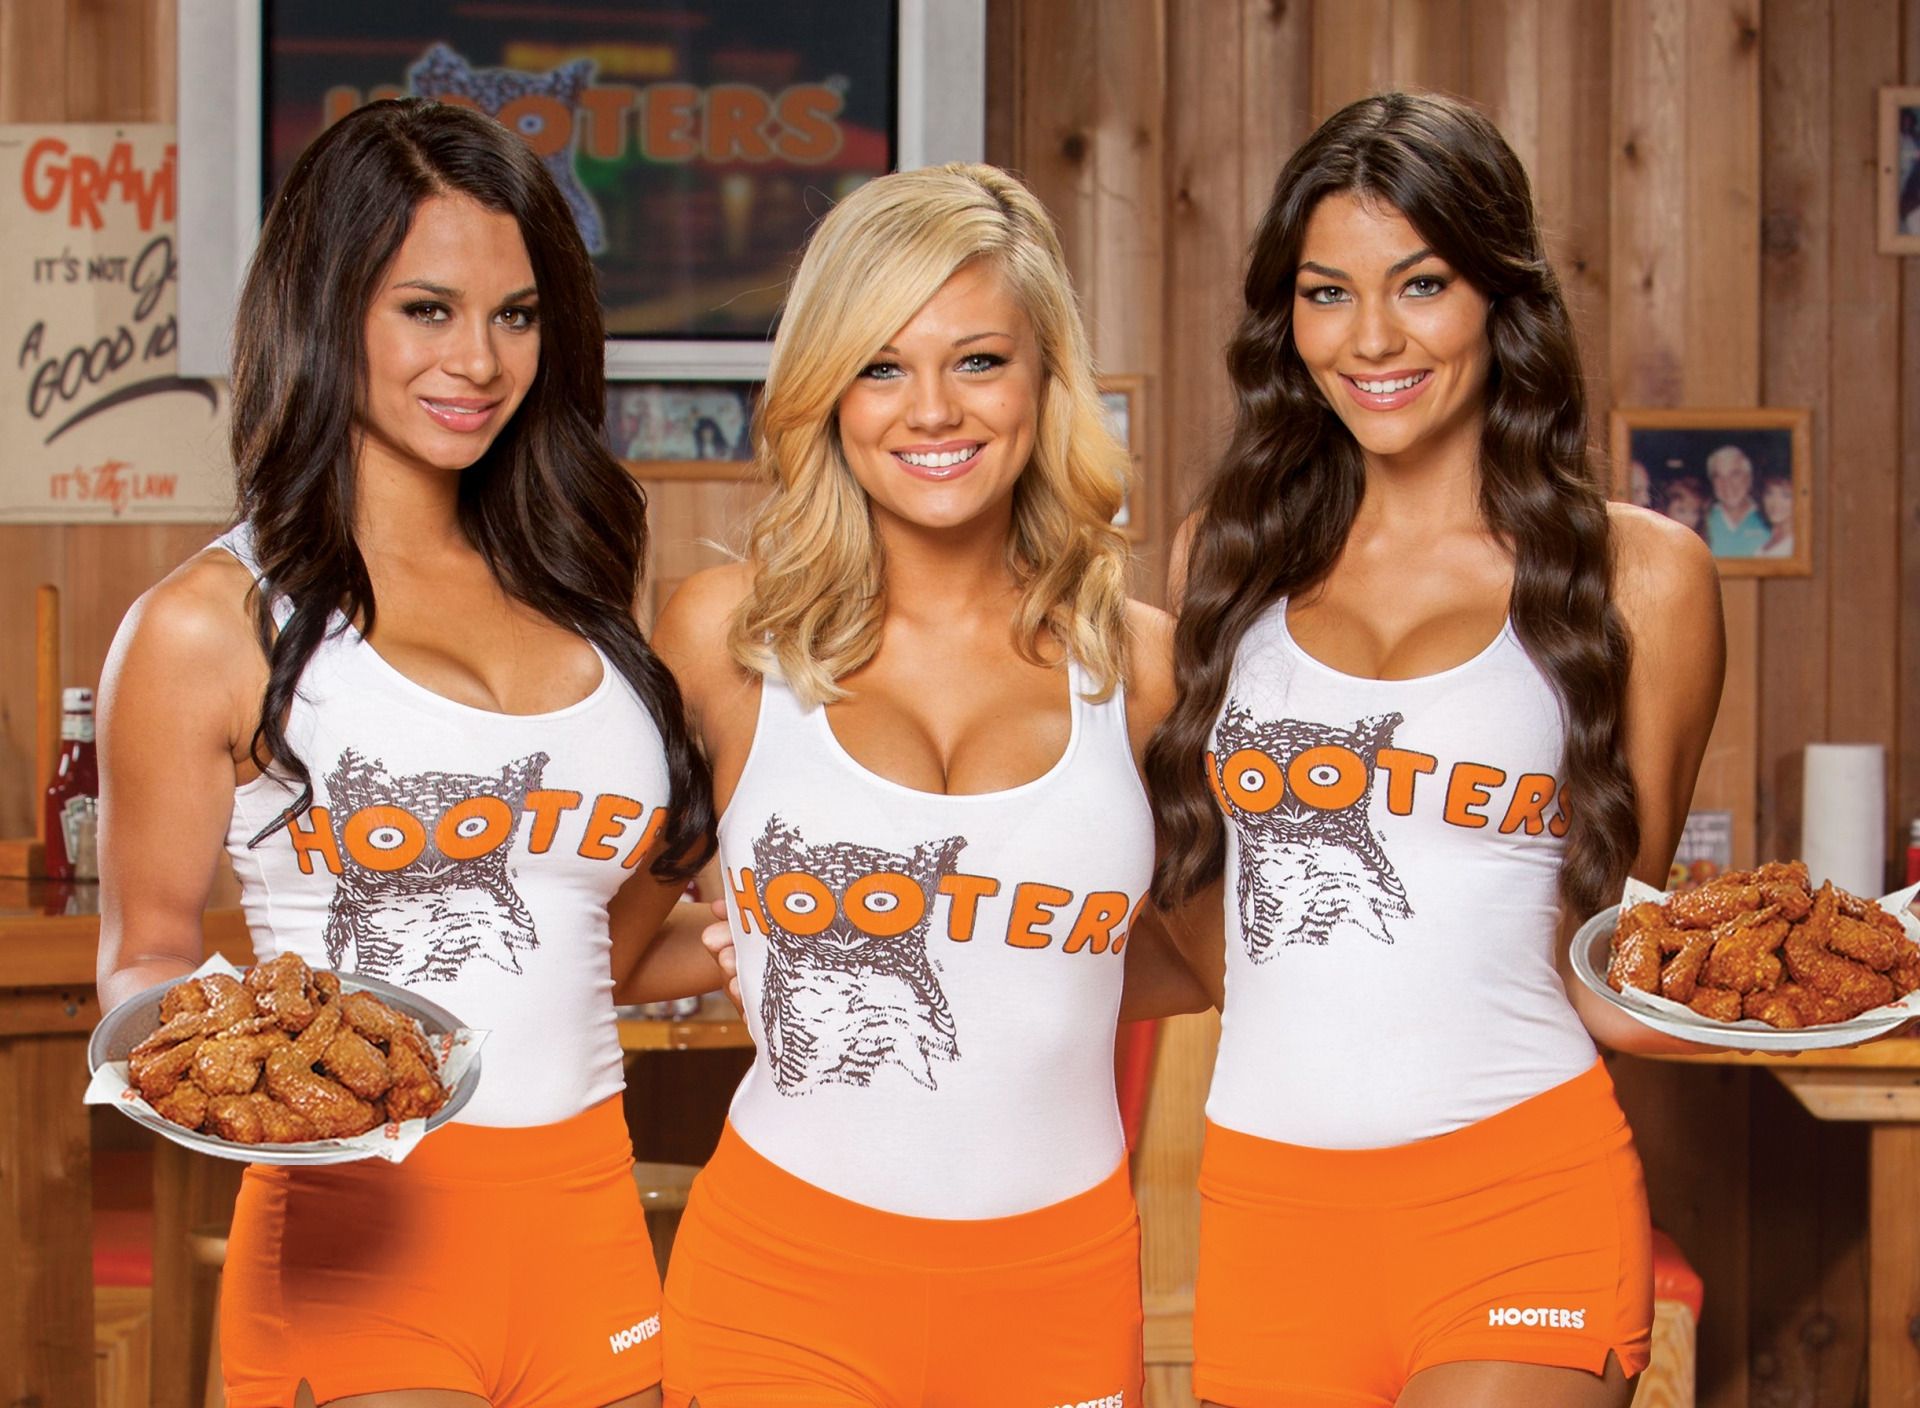 Old hooters girl pics — pic 1